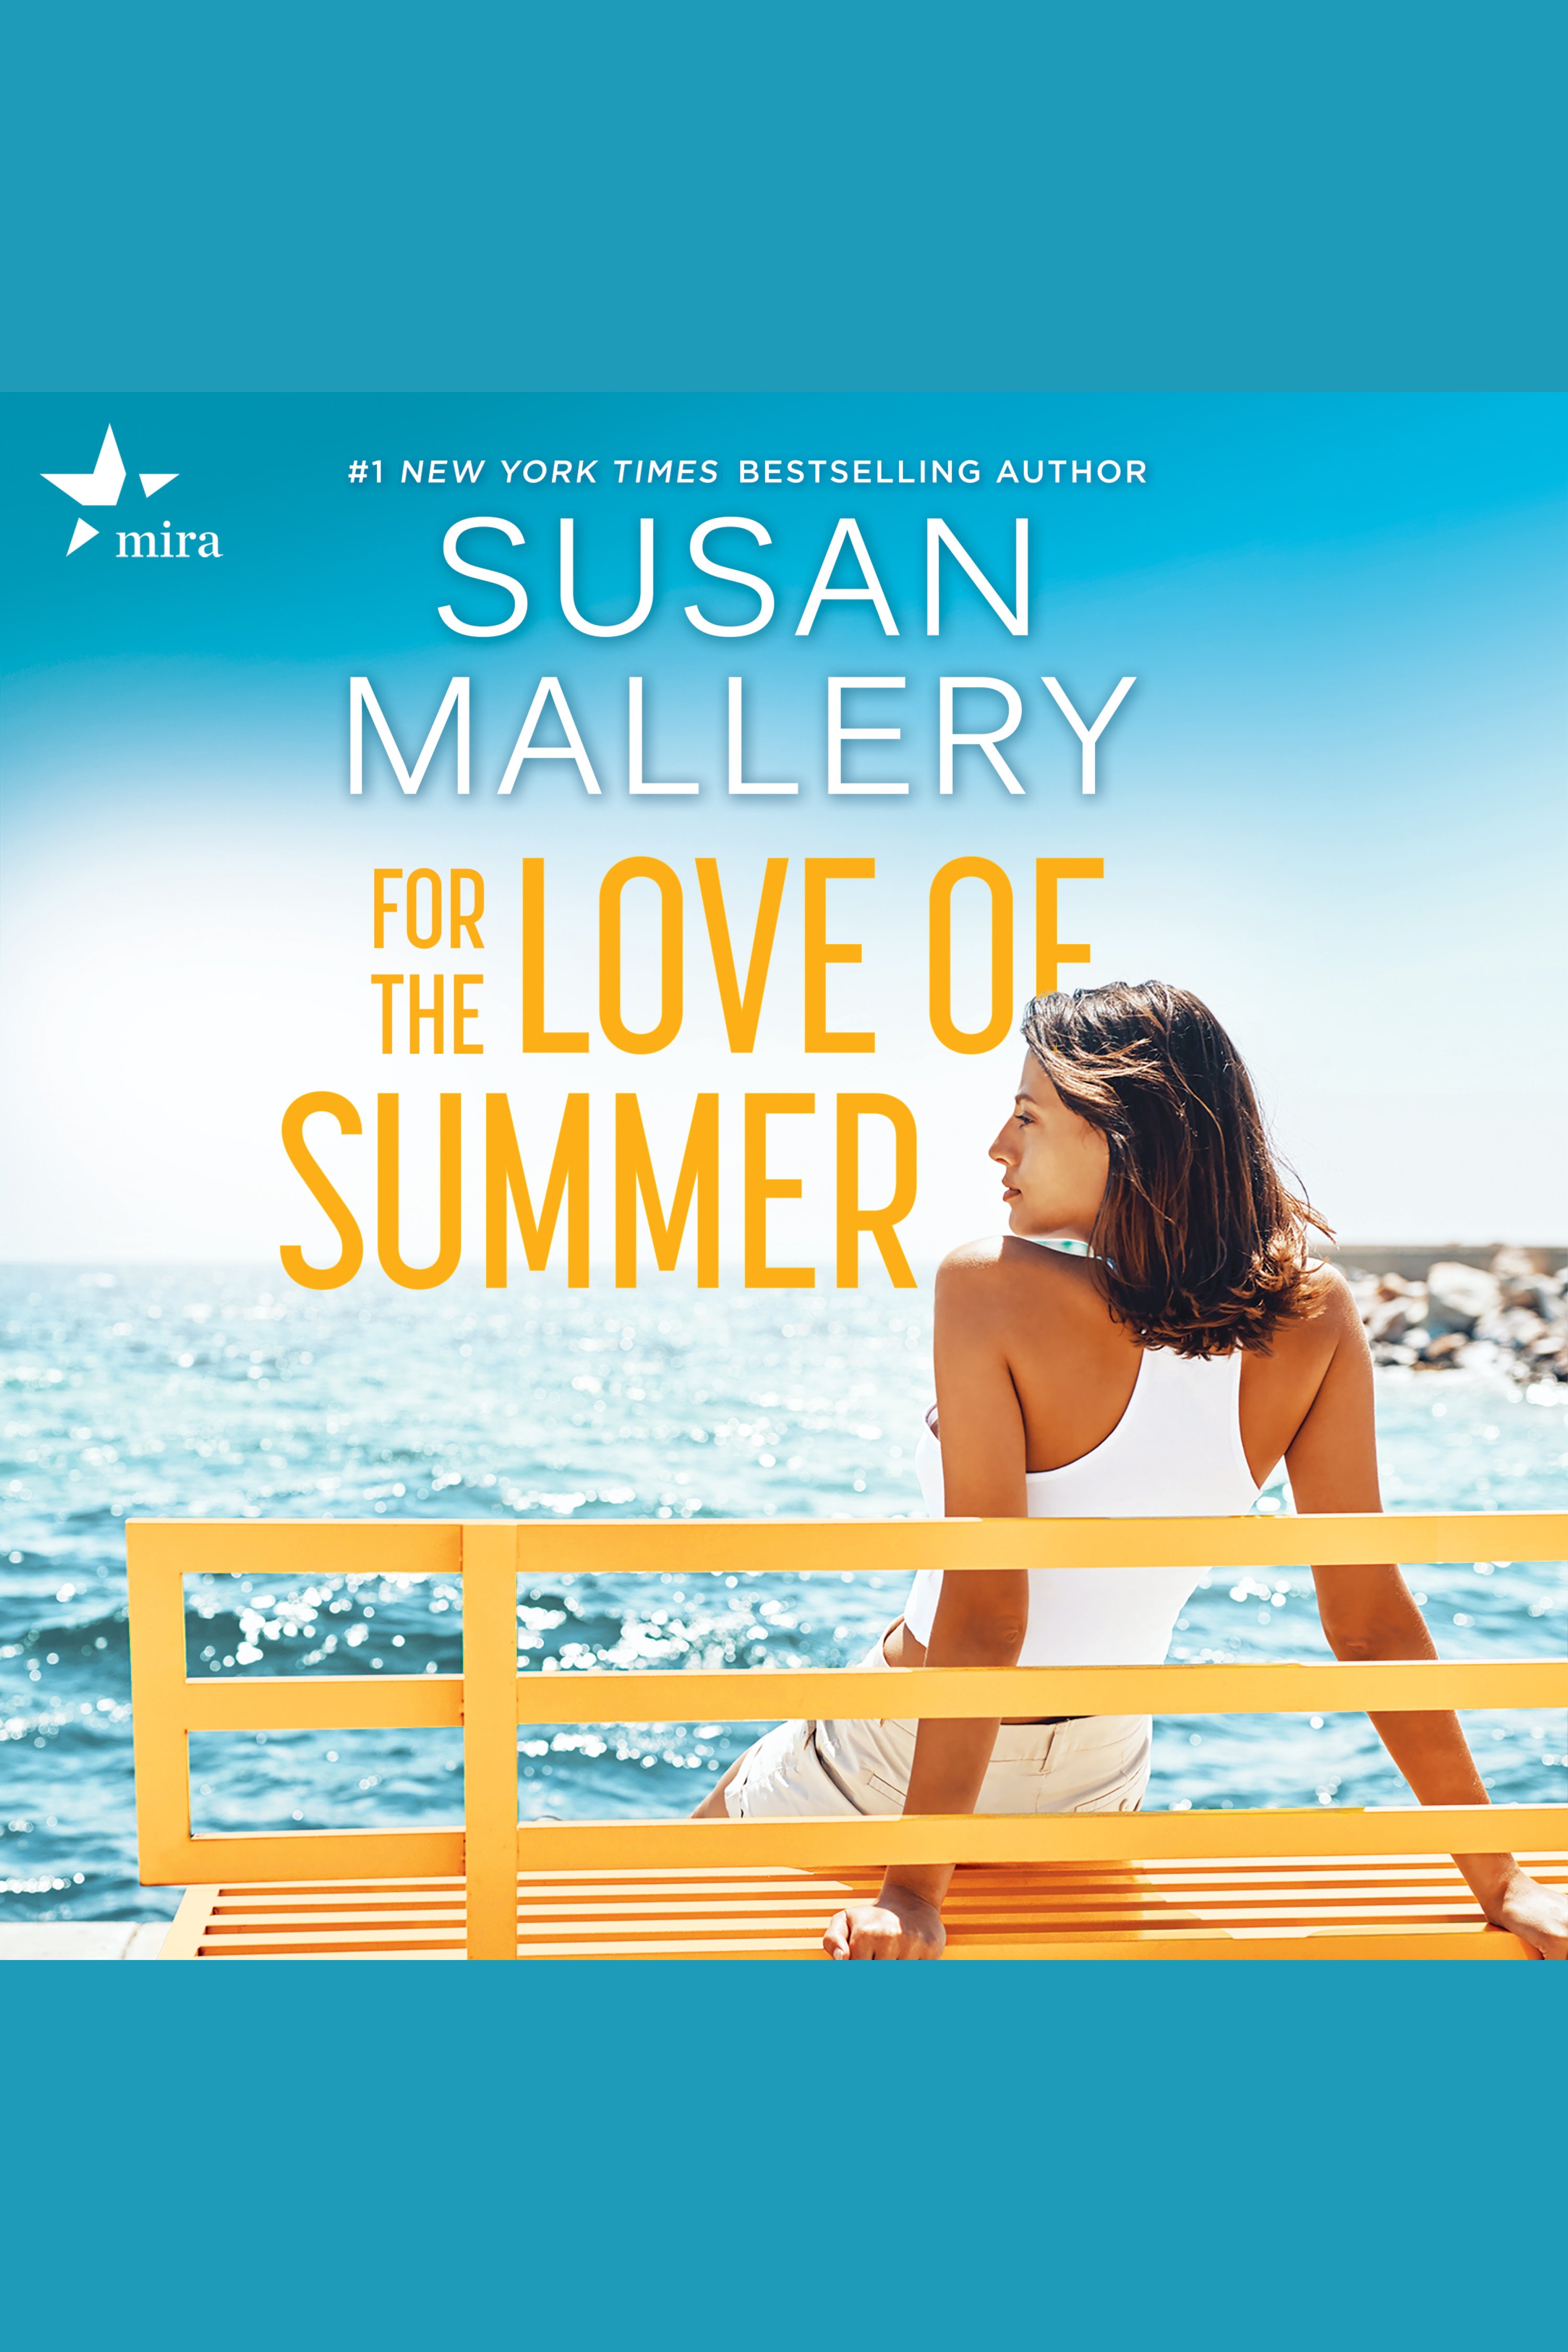 For the Love of Summer cover image